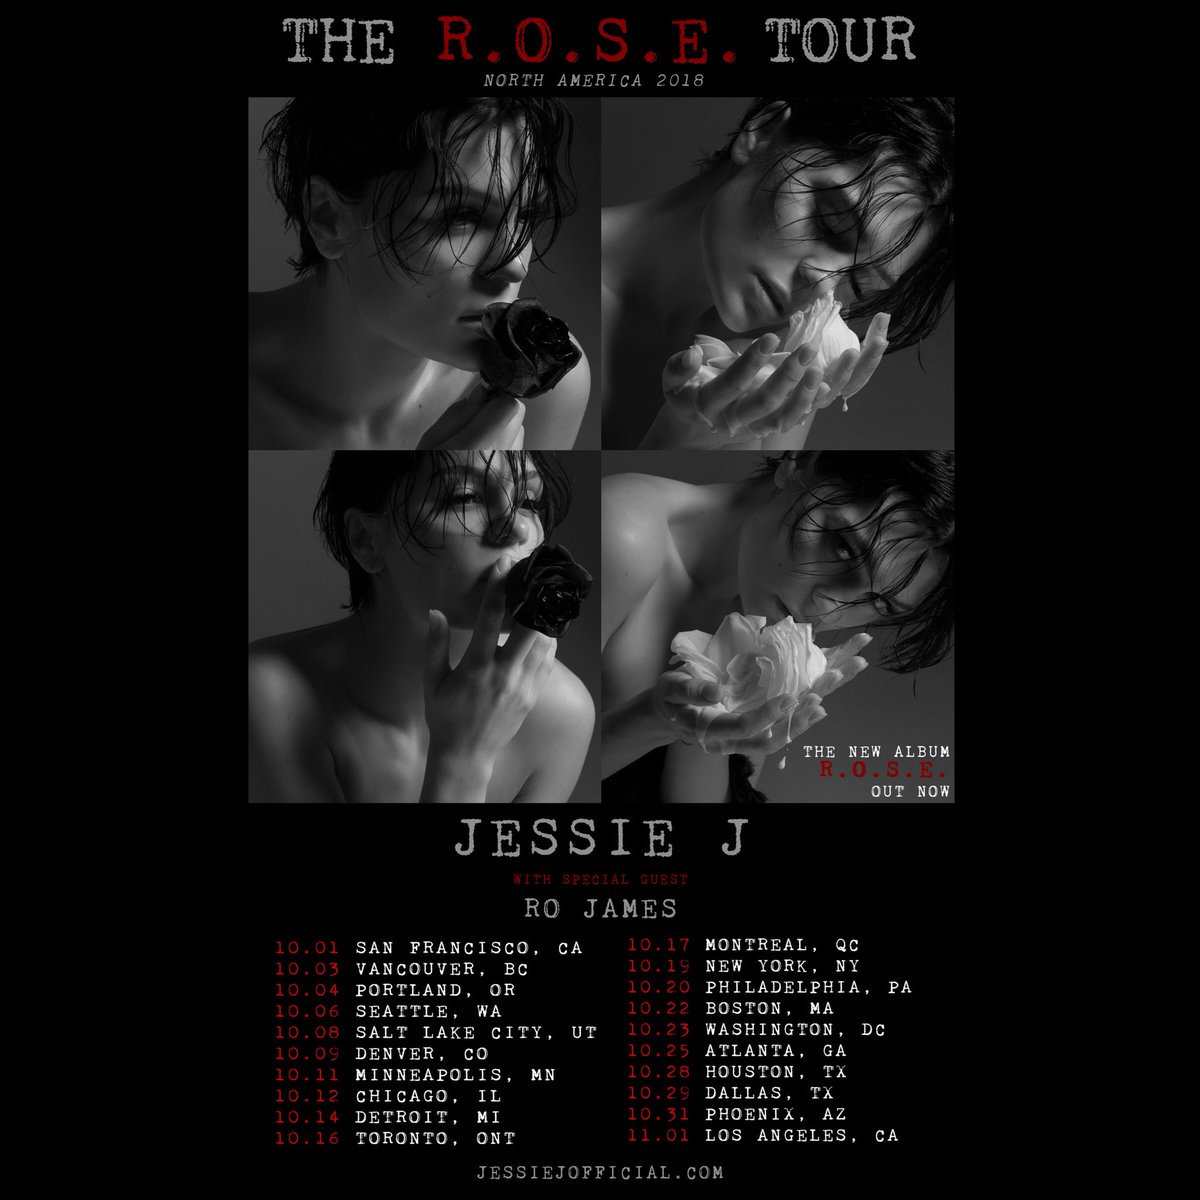 RT @UMG: #ICYMI - @JessieJ is hitting the road on THE R.O.S.E. TOUR! Tickets on sale tomorrow at 10 a.m. https://t.co/2fkelzHAJ7